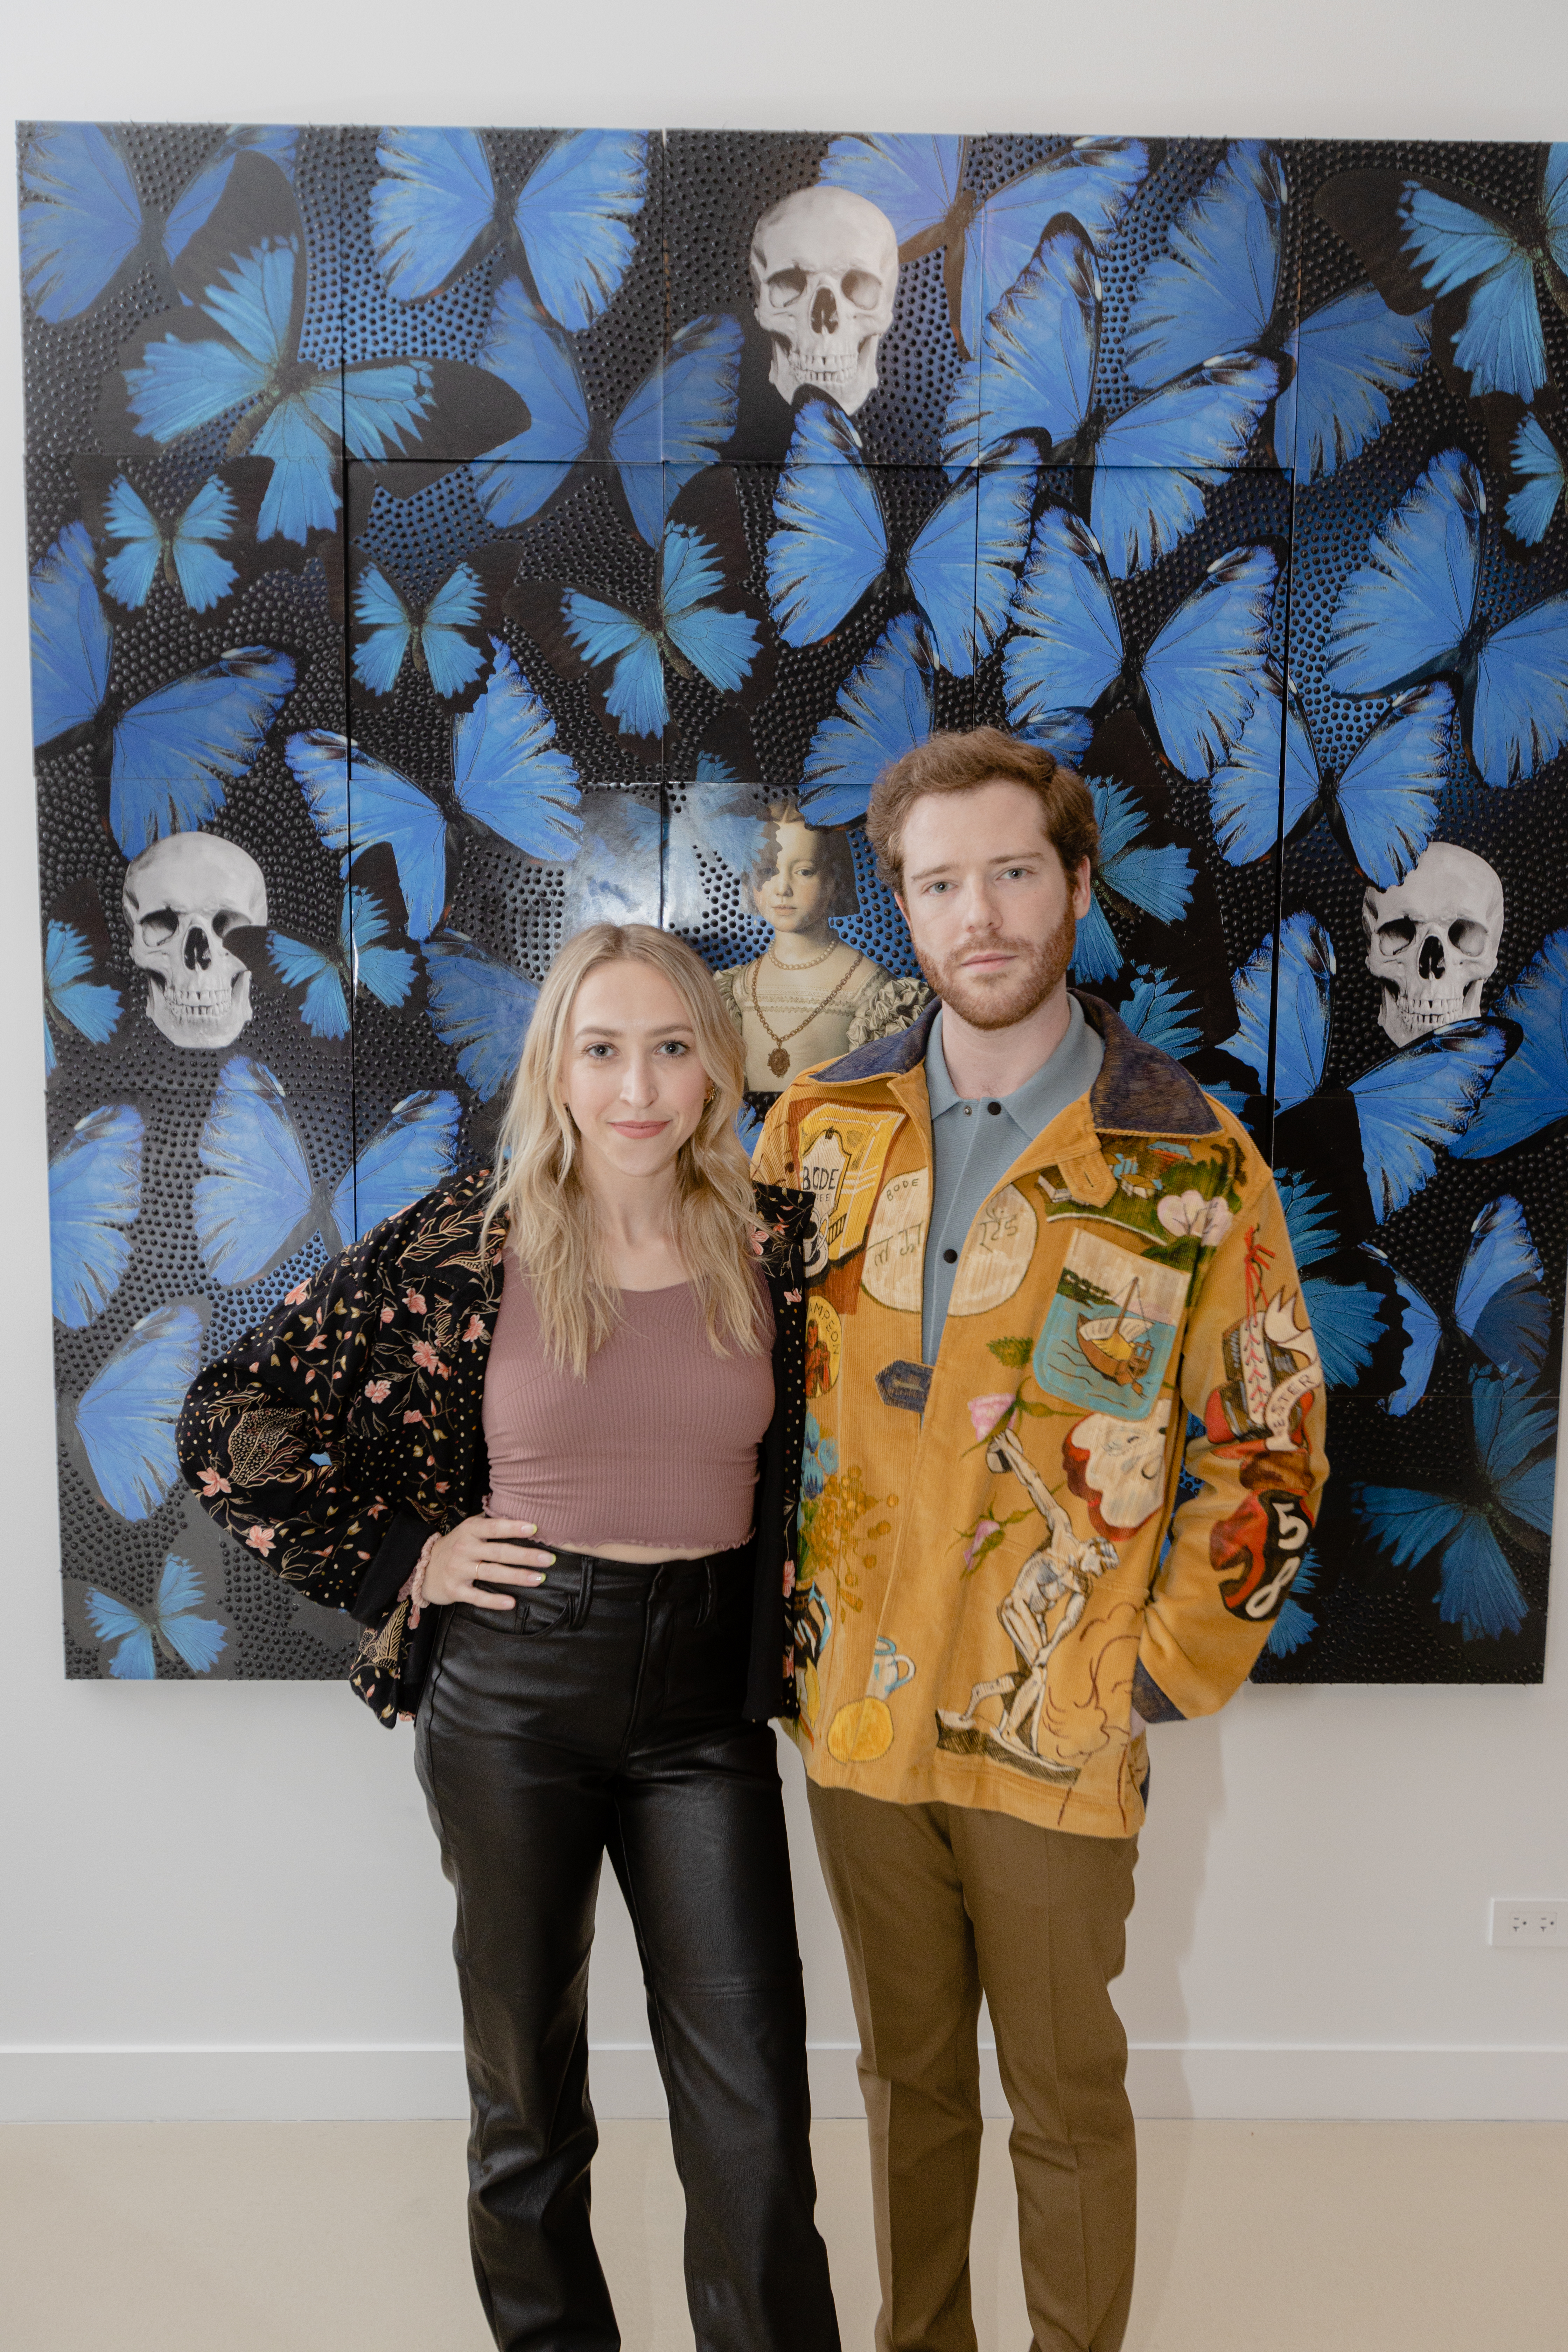 Katie_Northrop_Niday_and_Tanner_Munson_at_21c_Museum_Hotel_Chicago_s_Pop_Stars!_Popular_Culture_and_Contemporary_Art_Exhibition_Photo_Credit_Codi_Palm.jpg